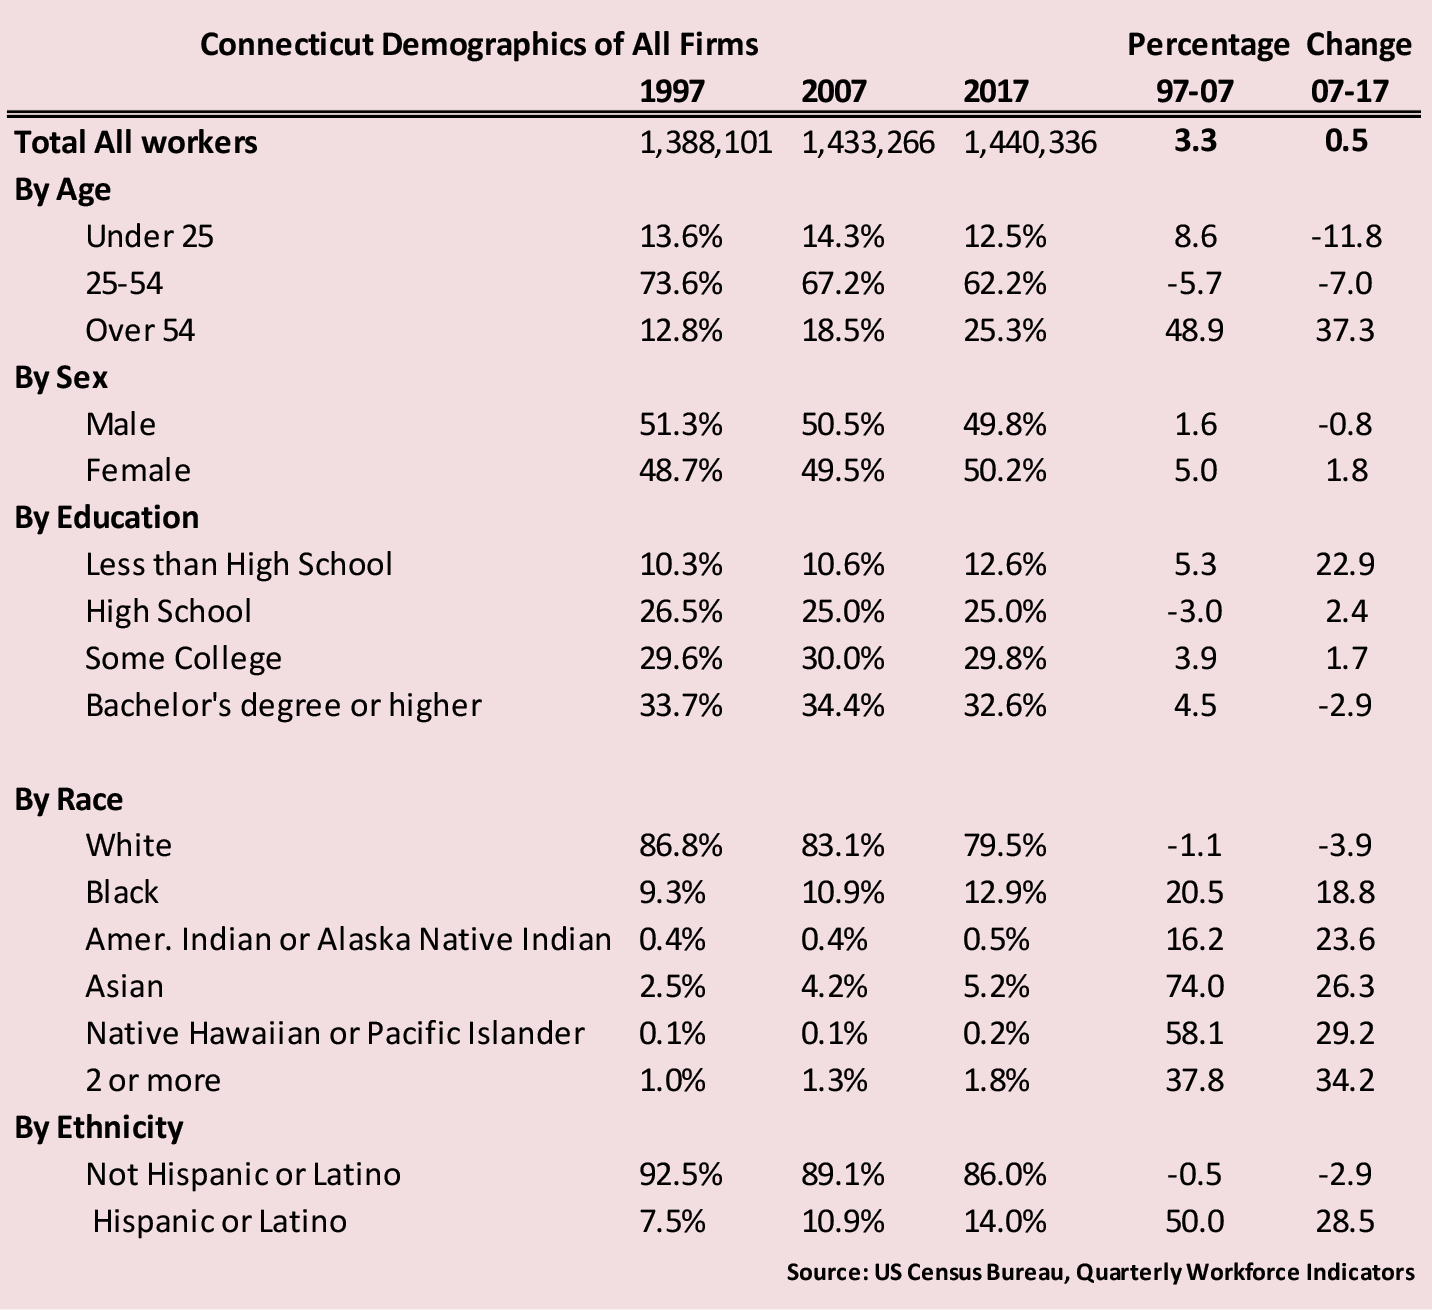 Connecticut Demographics of All Firms